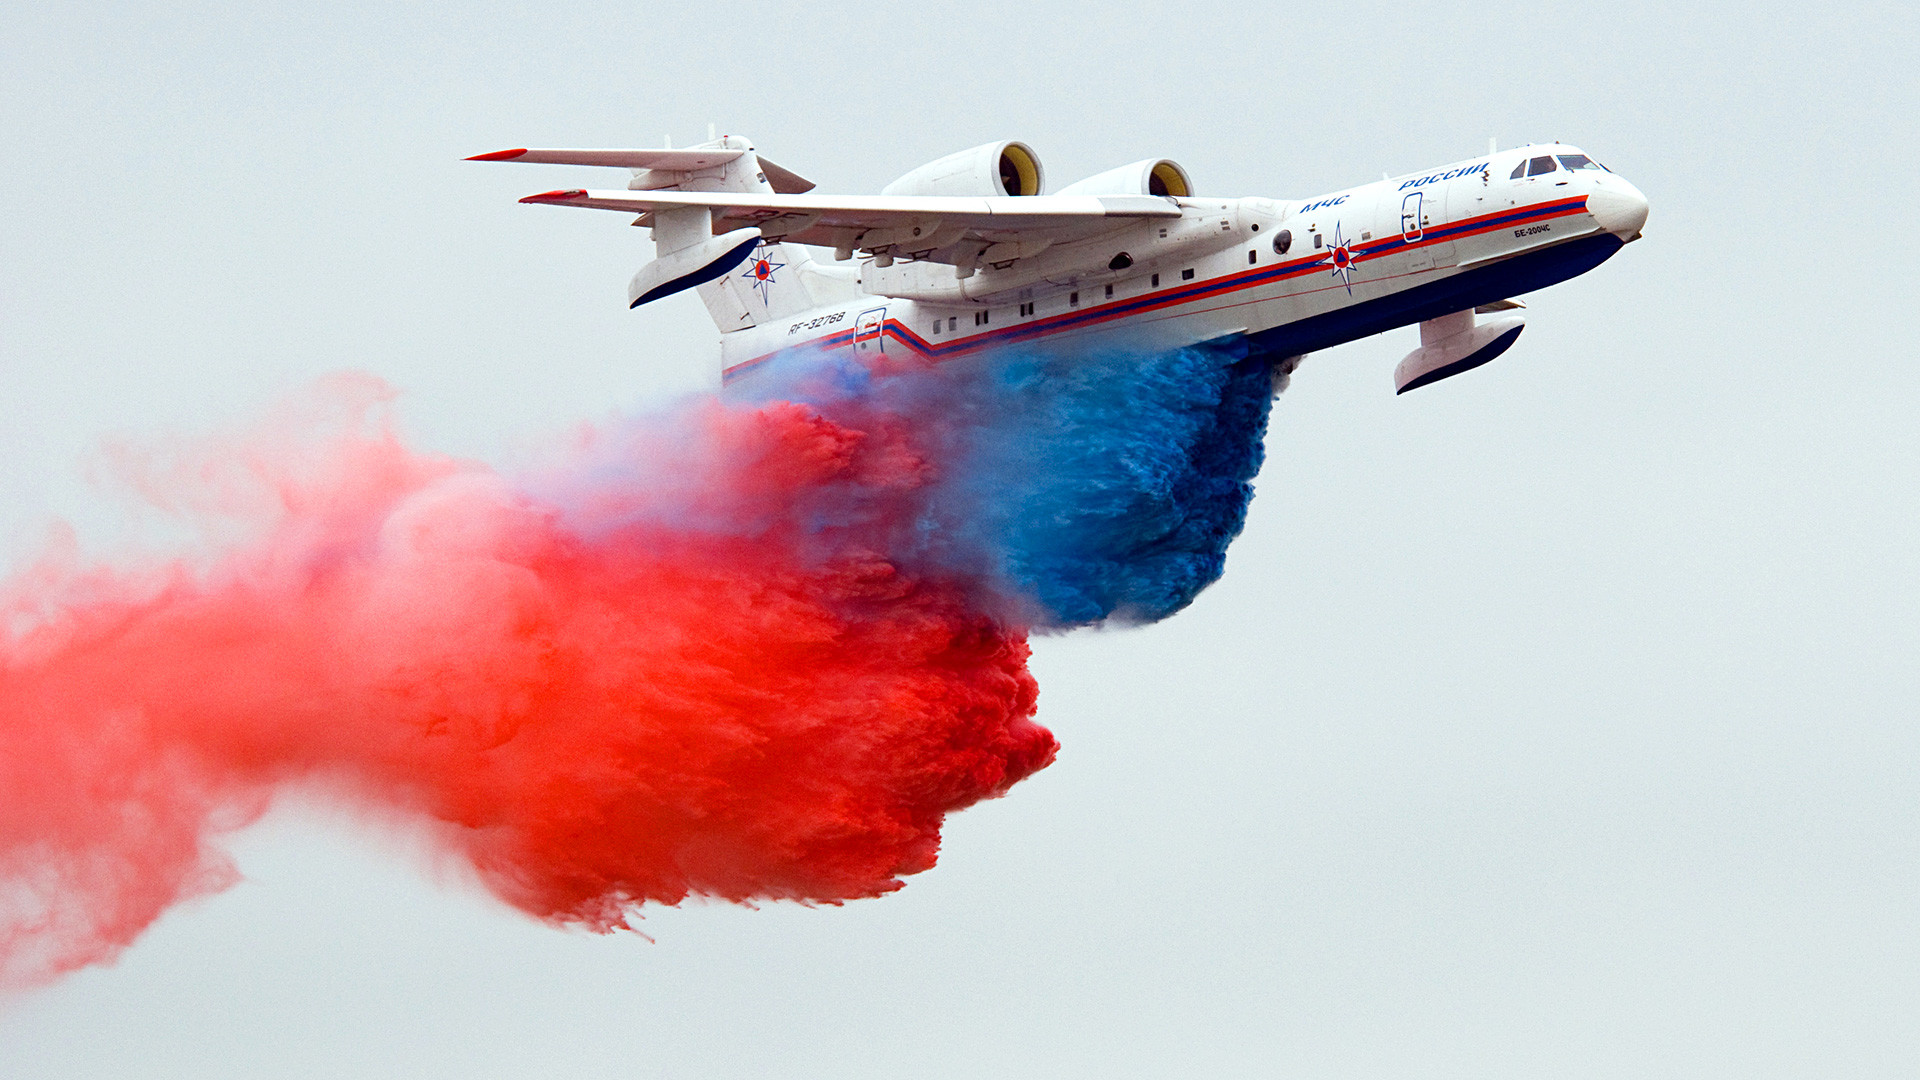 Colored water release from Beriev BE-200 aircraft at MAKS-2009 aeroshow 